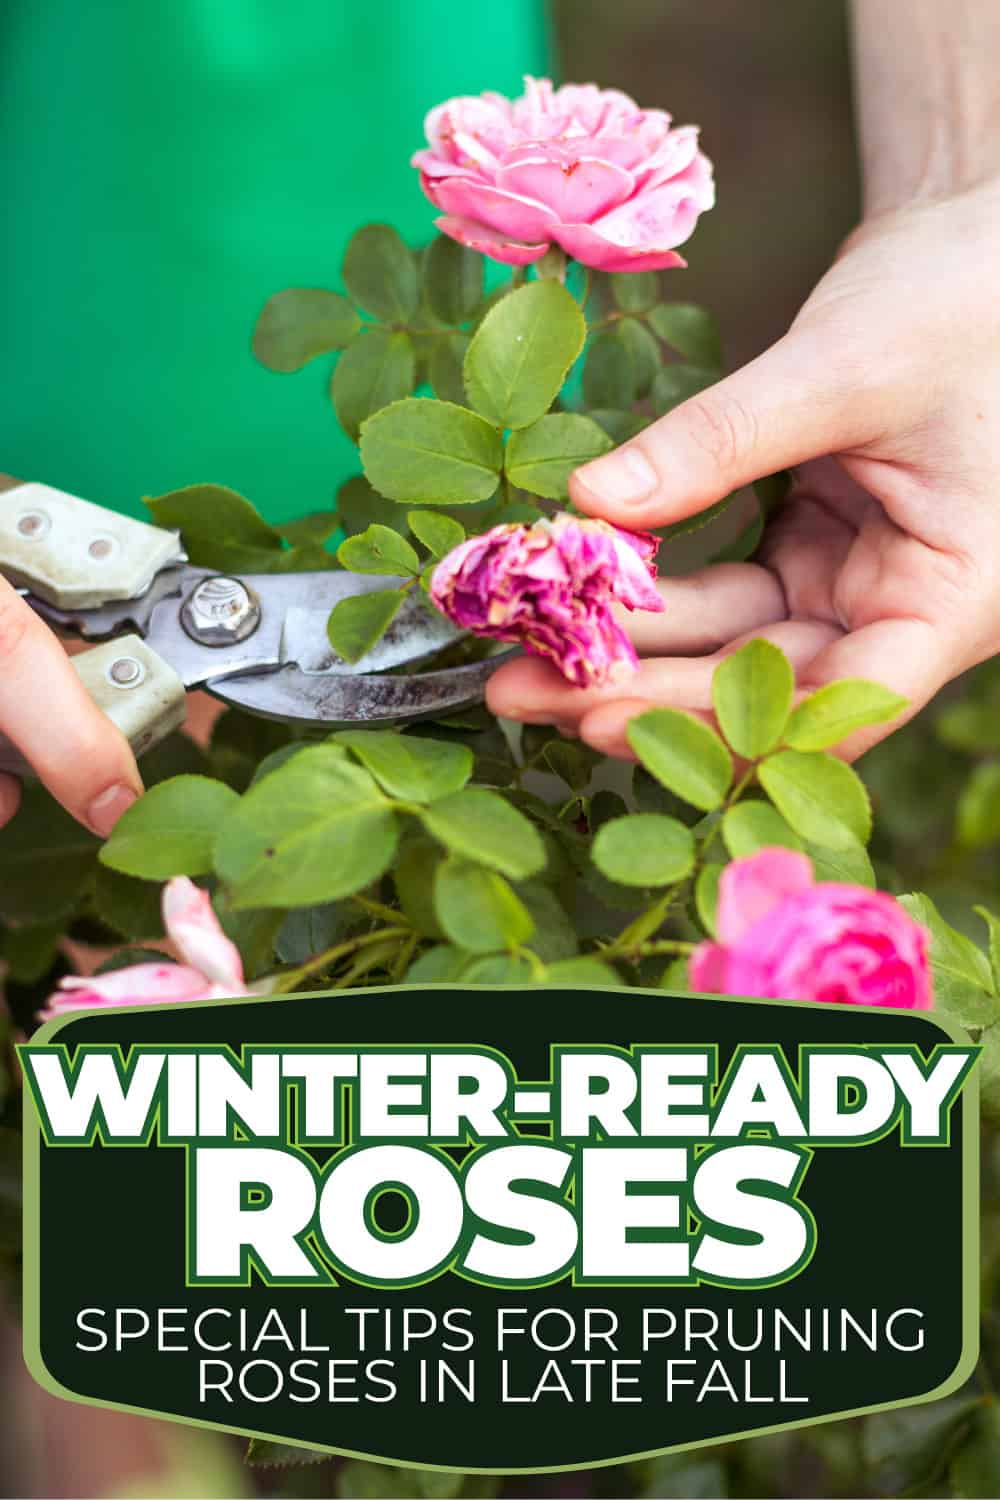 Winter-Ready Roses: Special Tips for Pruning Roses in Late Fall